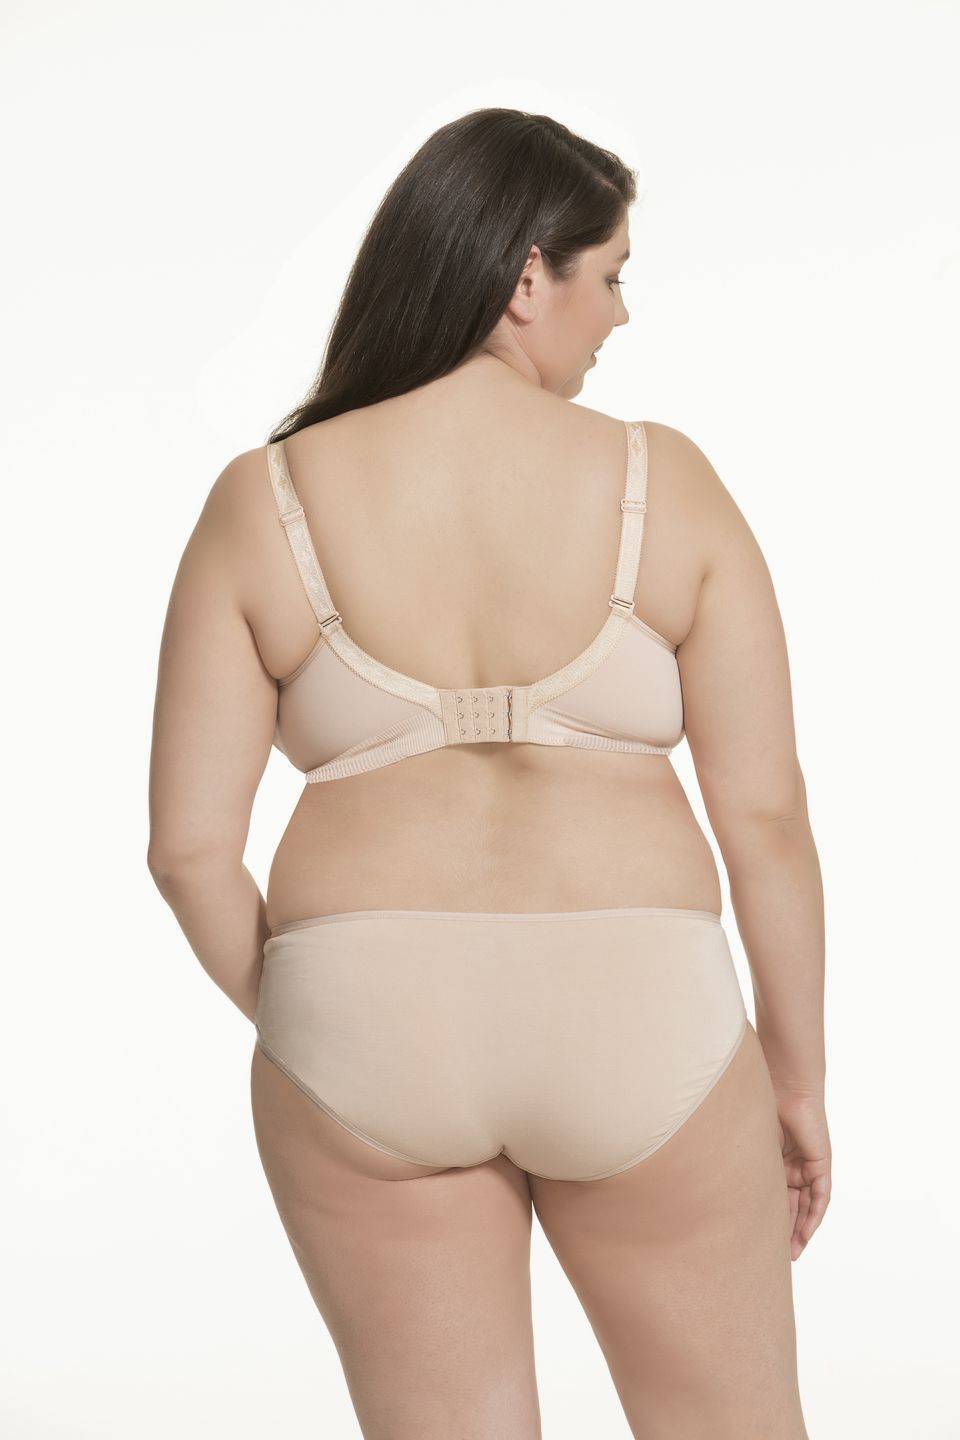 Cake Lingerie Sugar Candy Small Beige